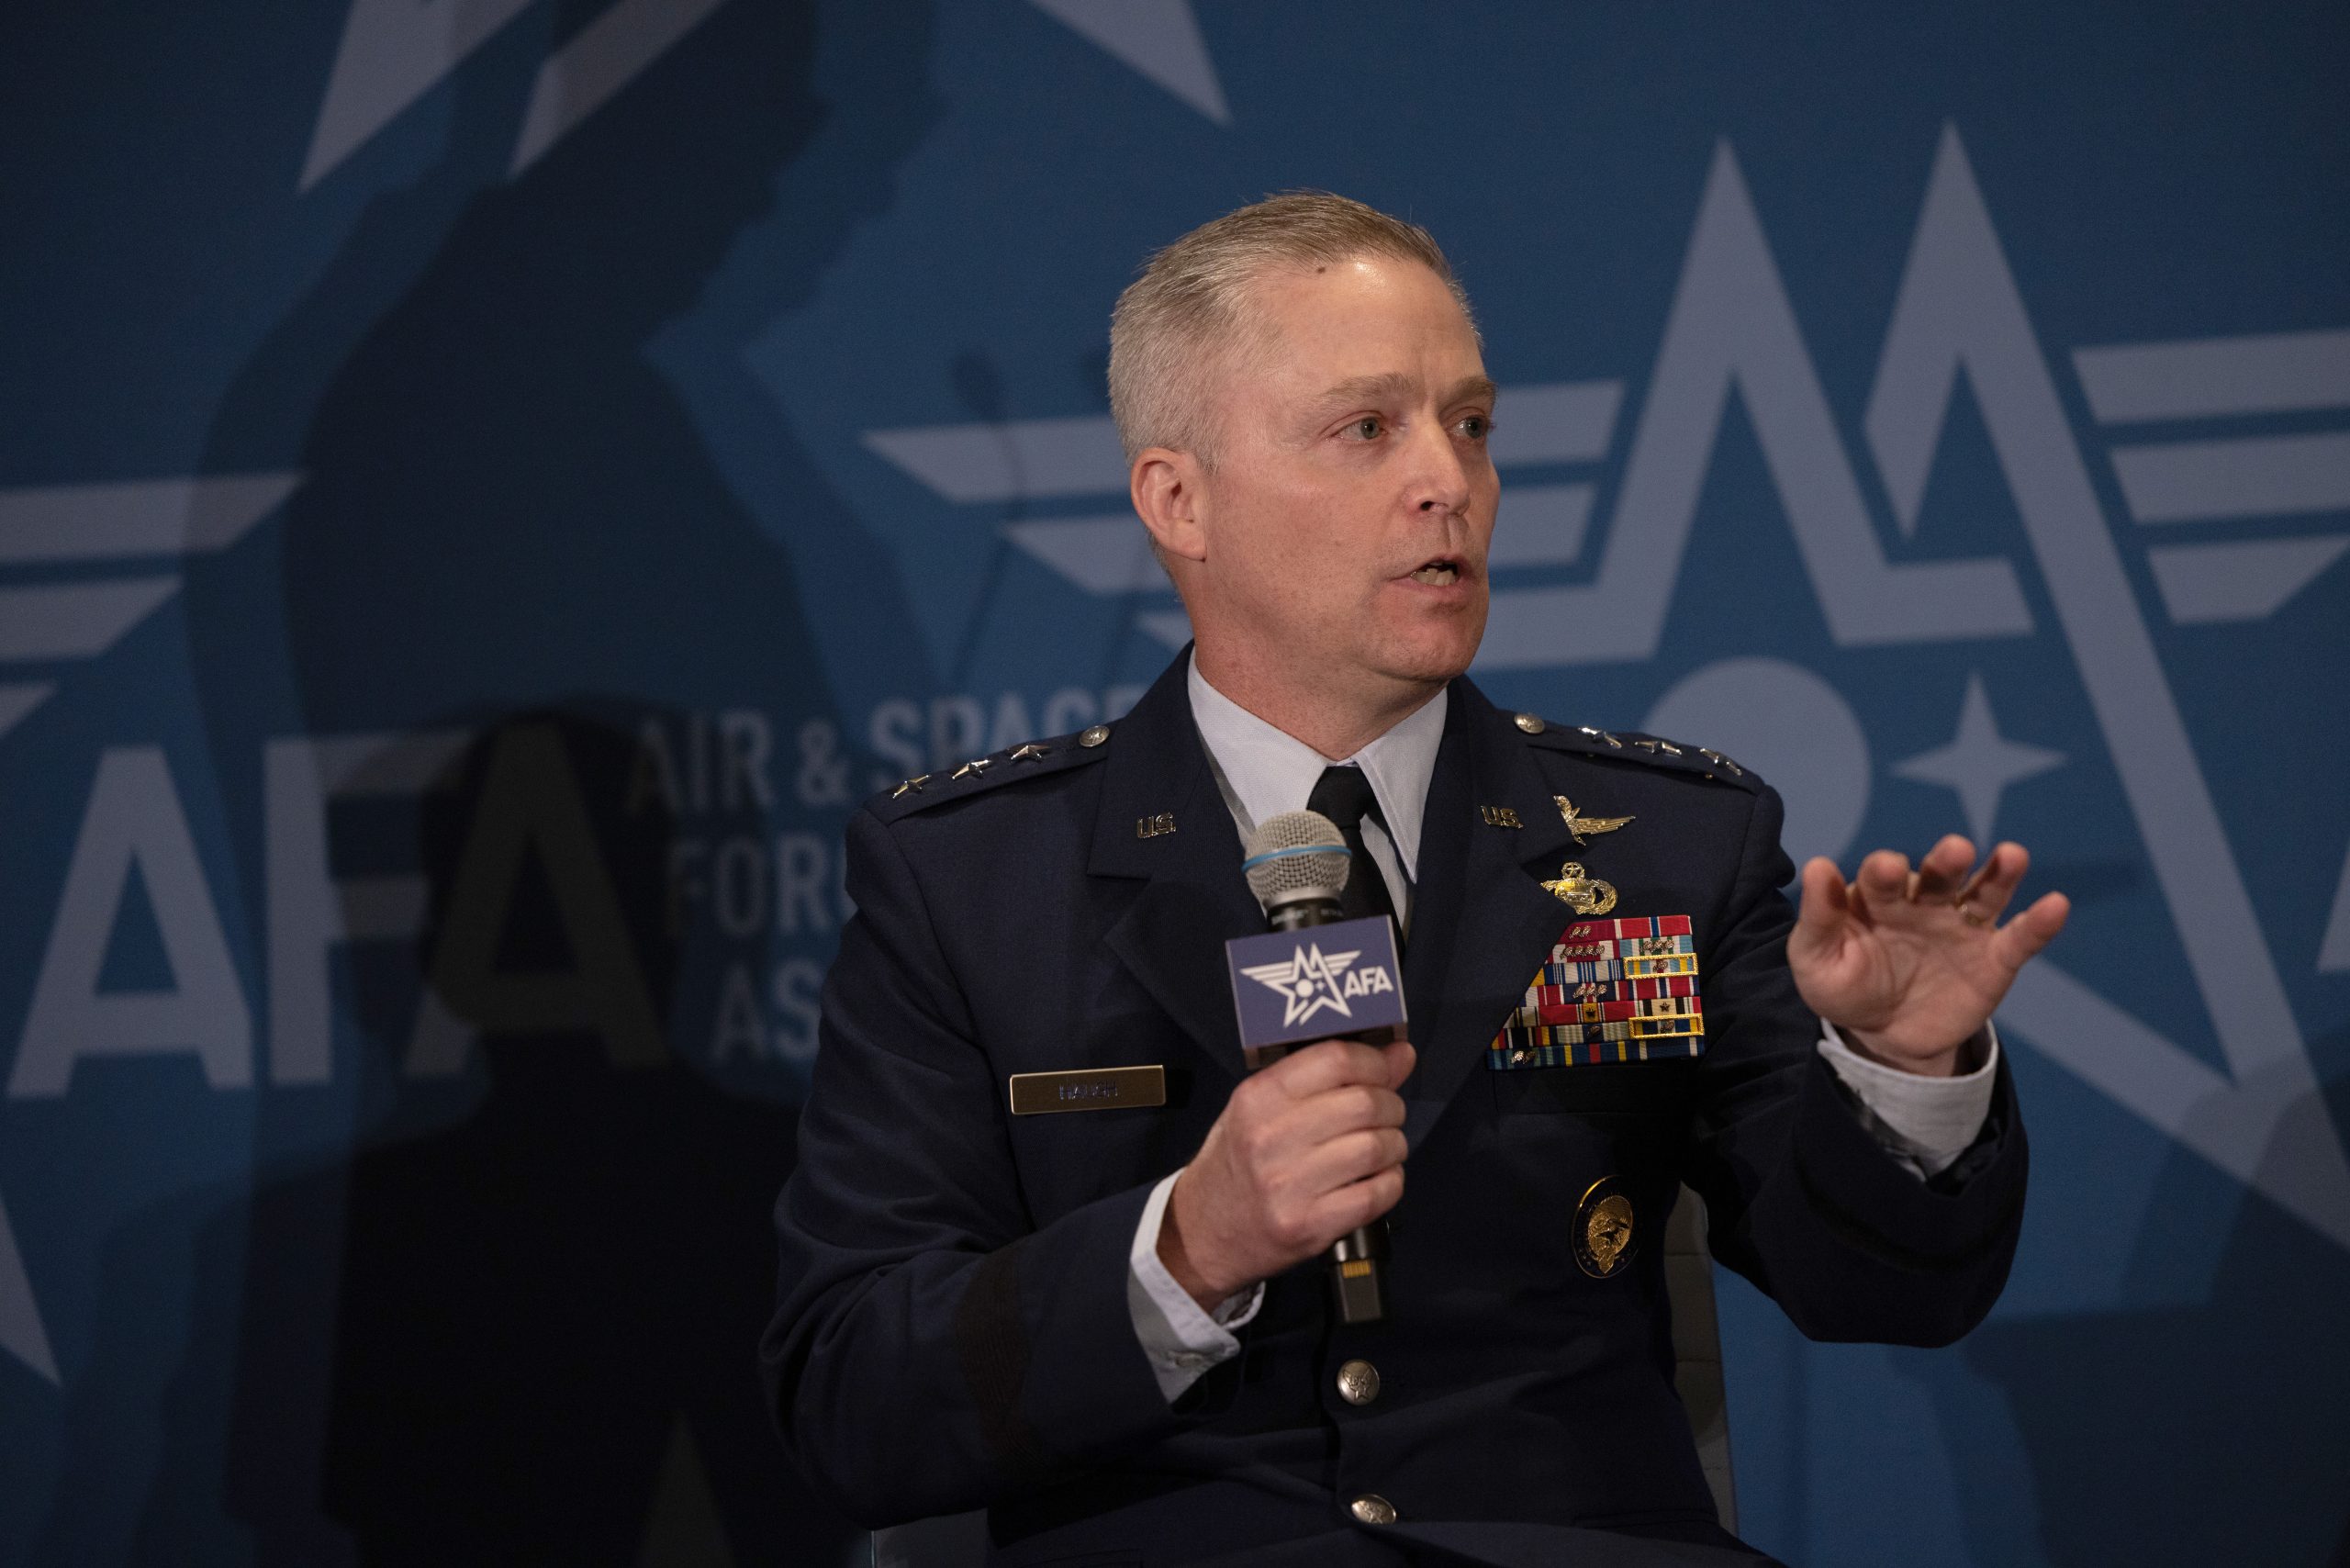 Haugh Becomes First Airman to Take Command at CYBERCOM